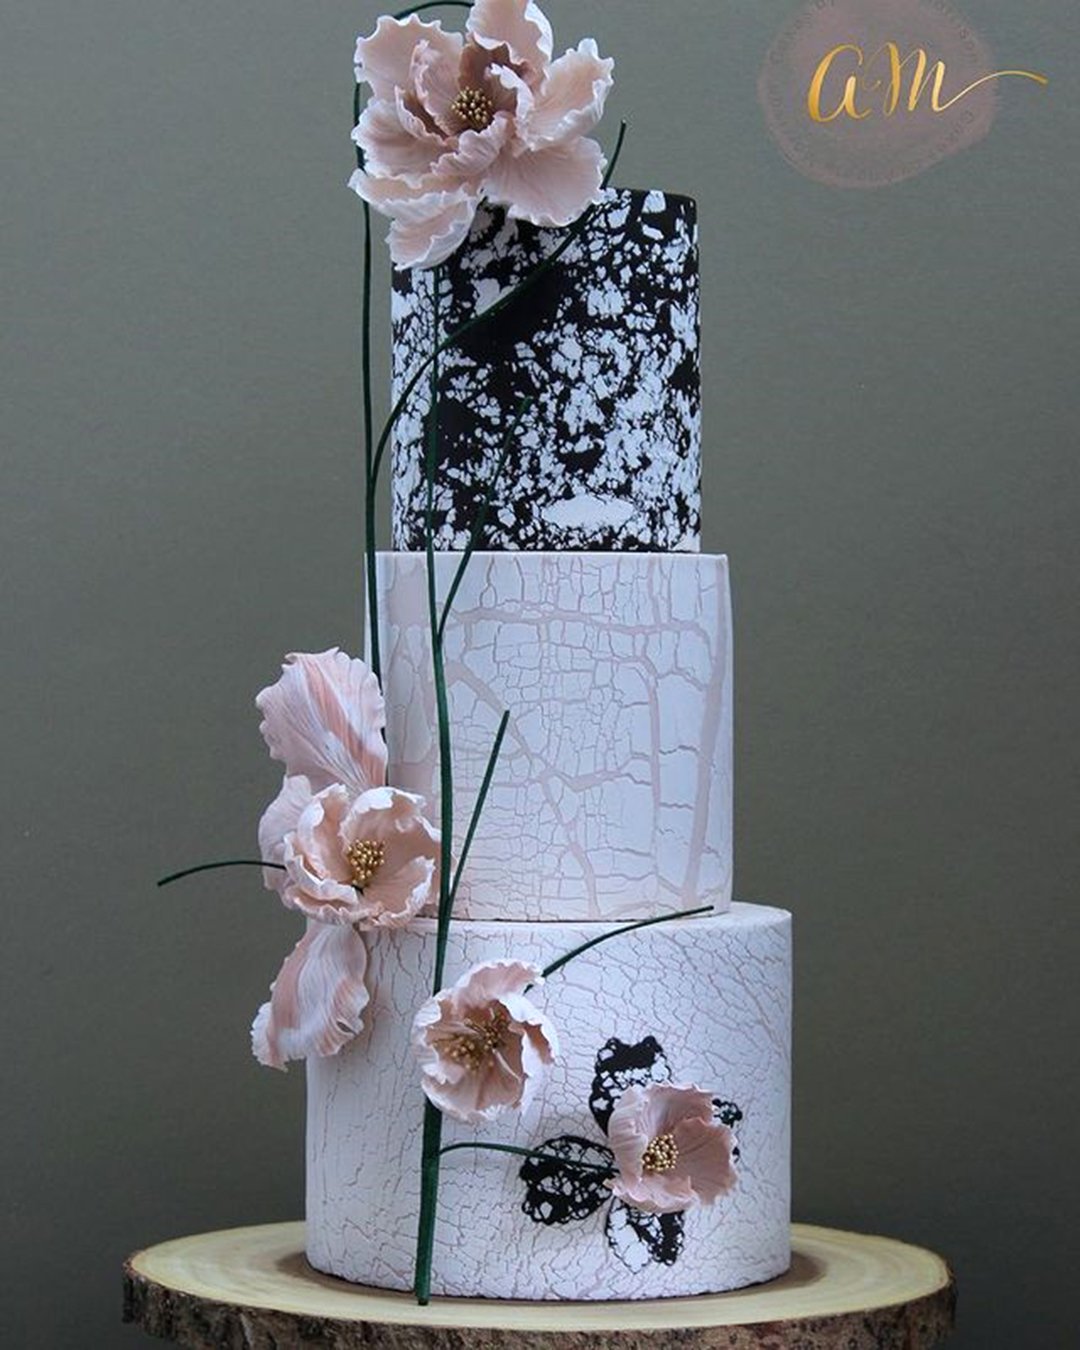 black and white wedding cakes minimalistic black and white cakesblack and white wedding cakes wedding cakes with flowers ideas